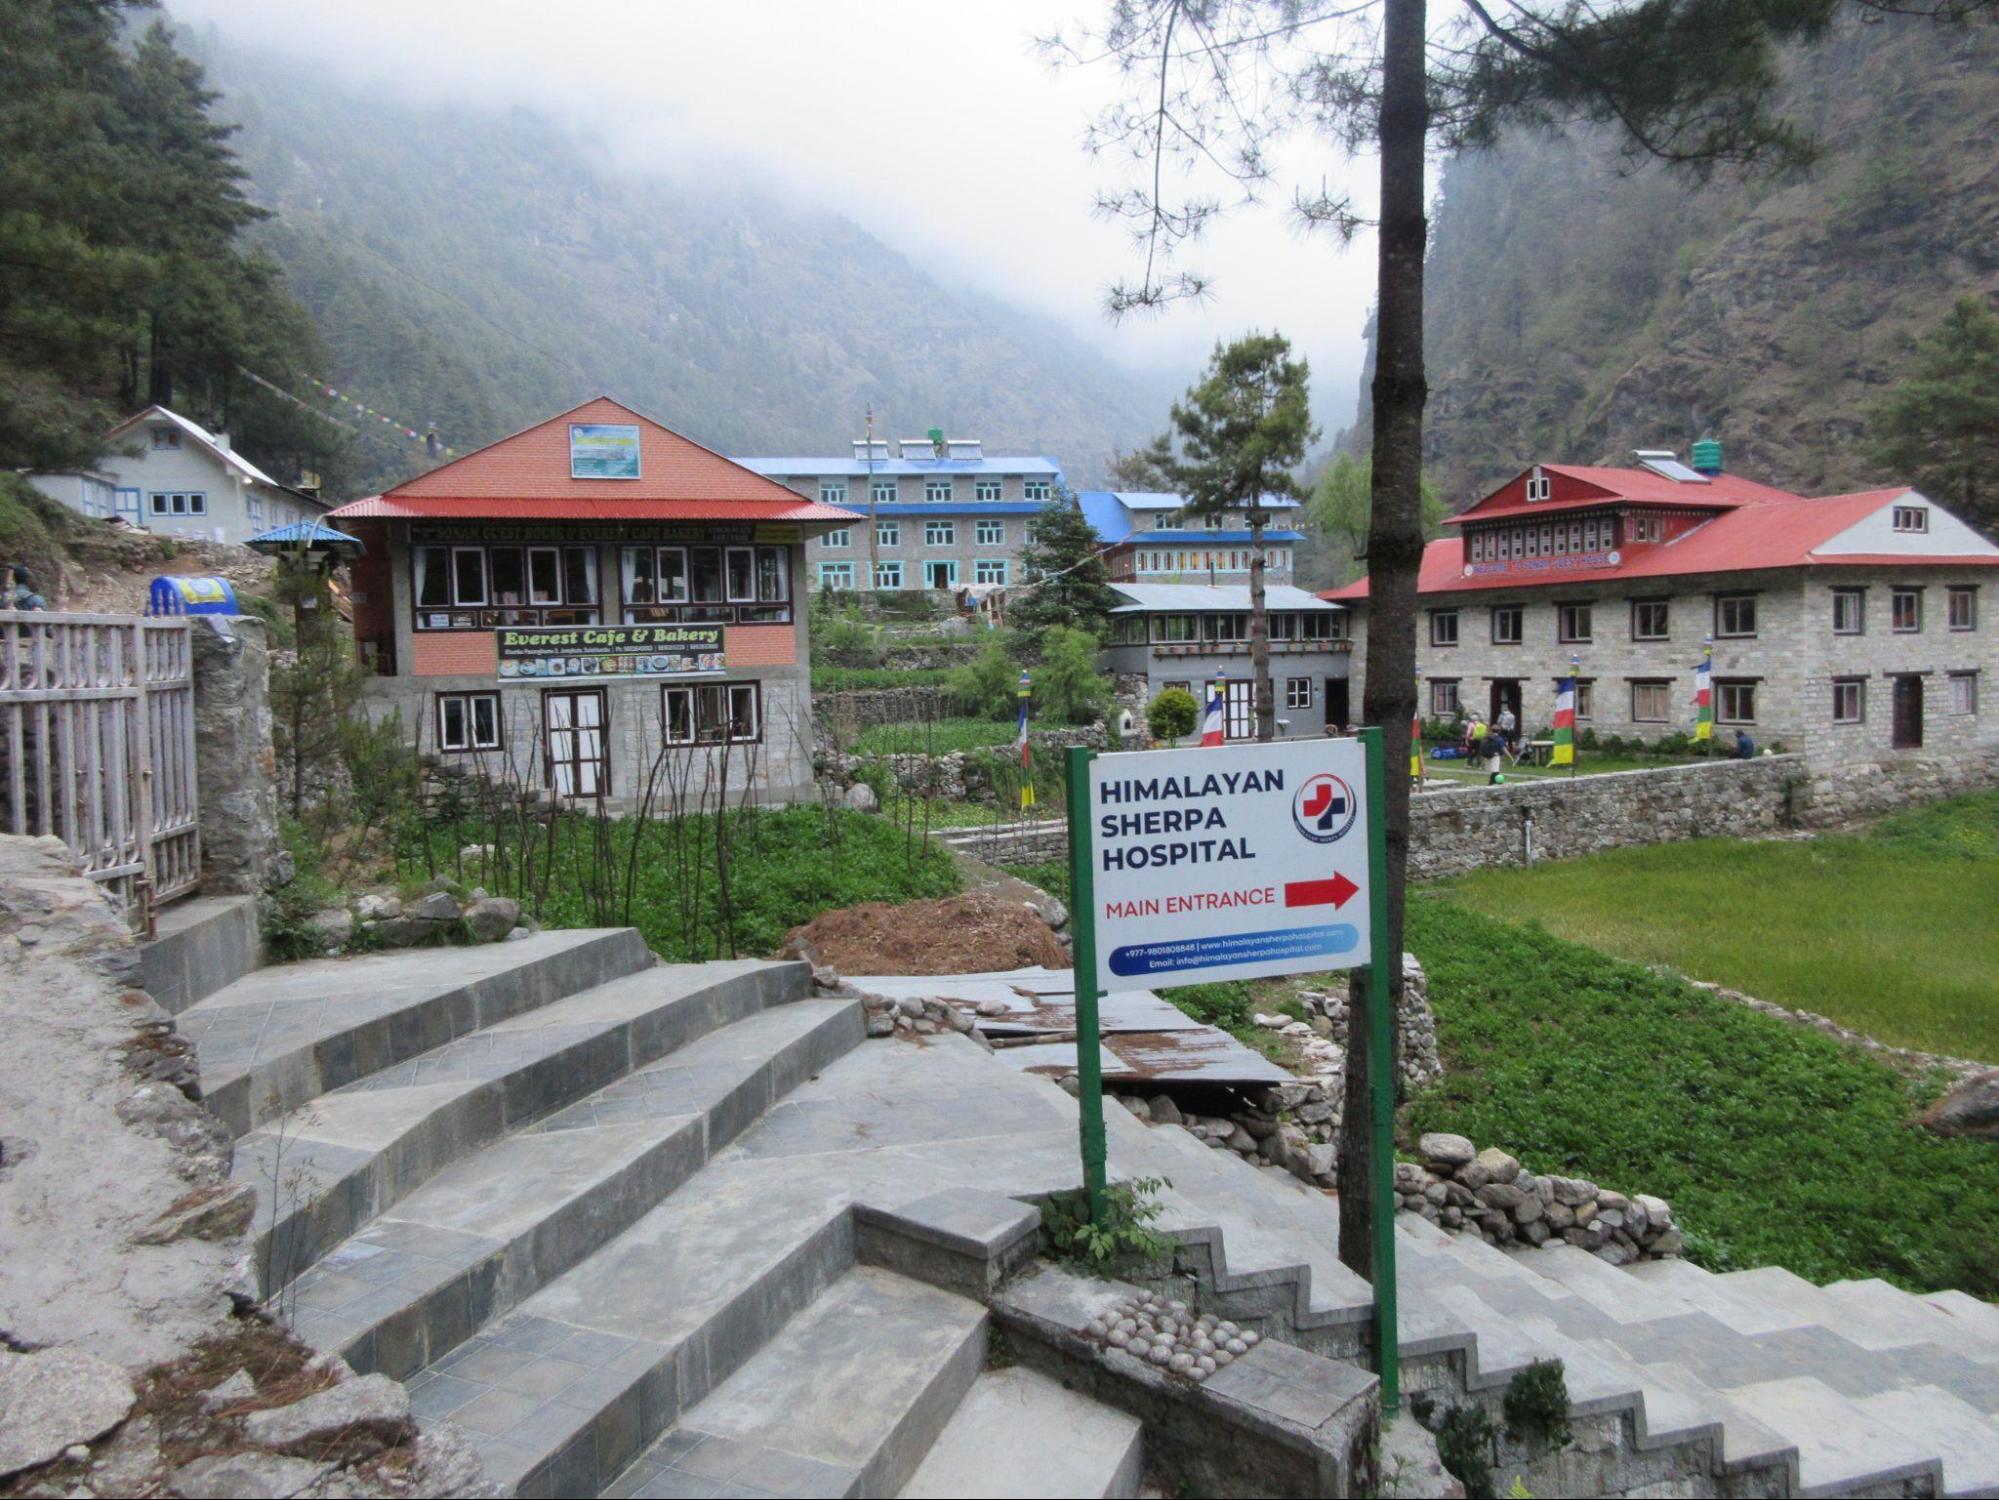 The Himalayan Sherpa Hospital: One of the hospitals supported by The Himalayan Trust